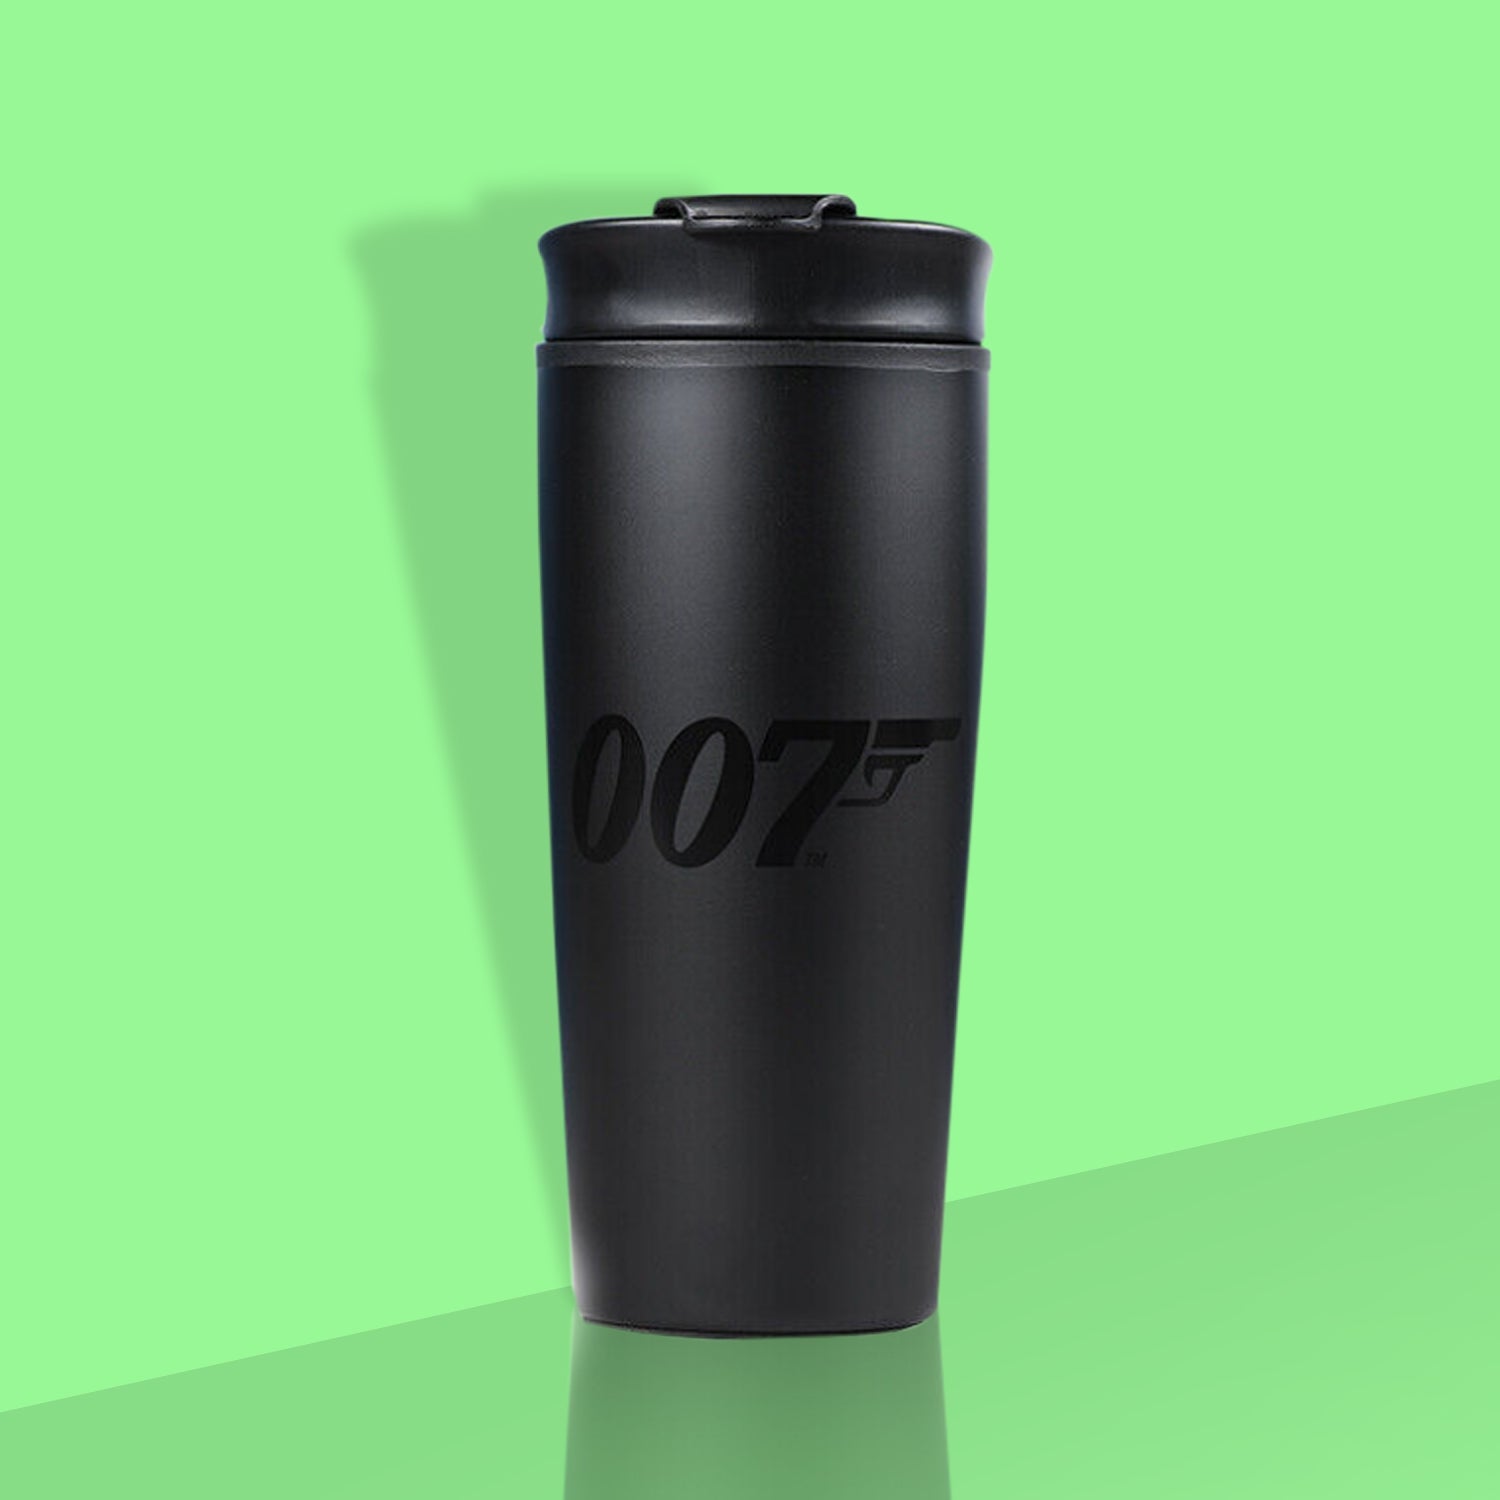 James Bond Hot & Cold Water Bottle By Chilly's